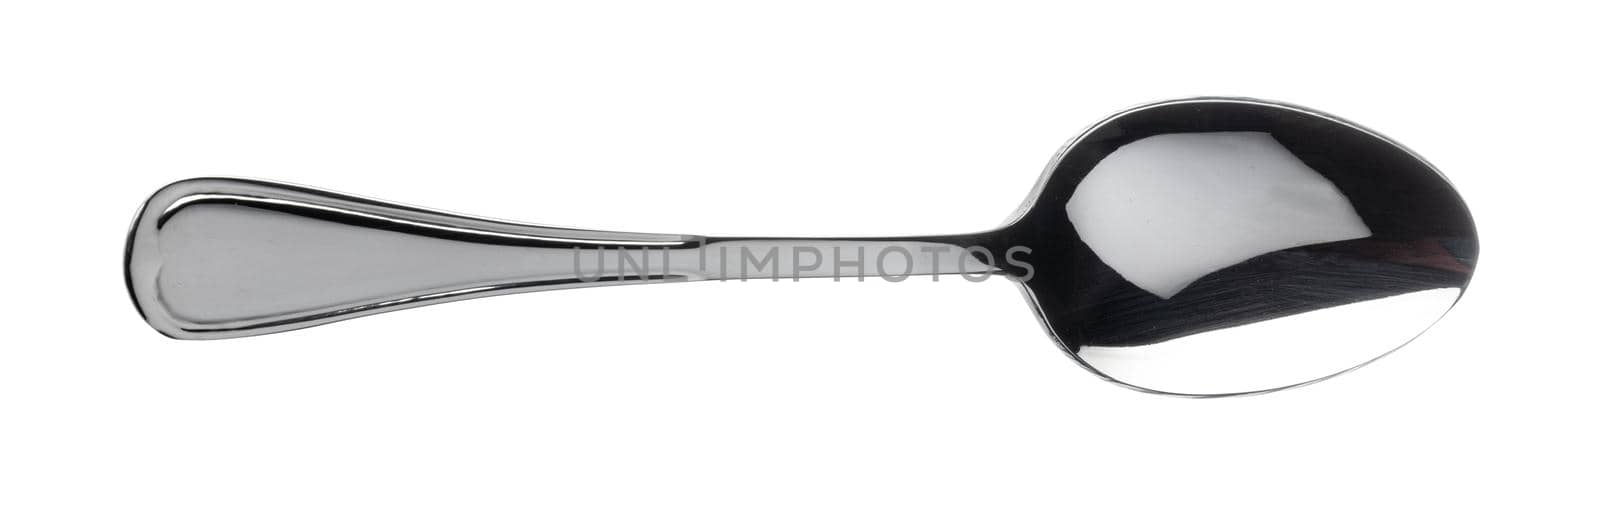 Silver spoon cutlery isolated on white background, top view